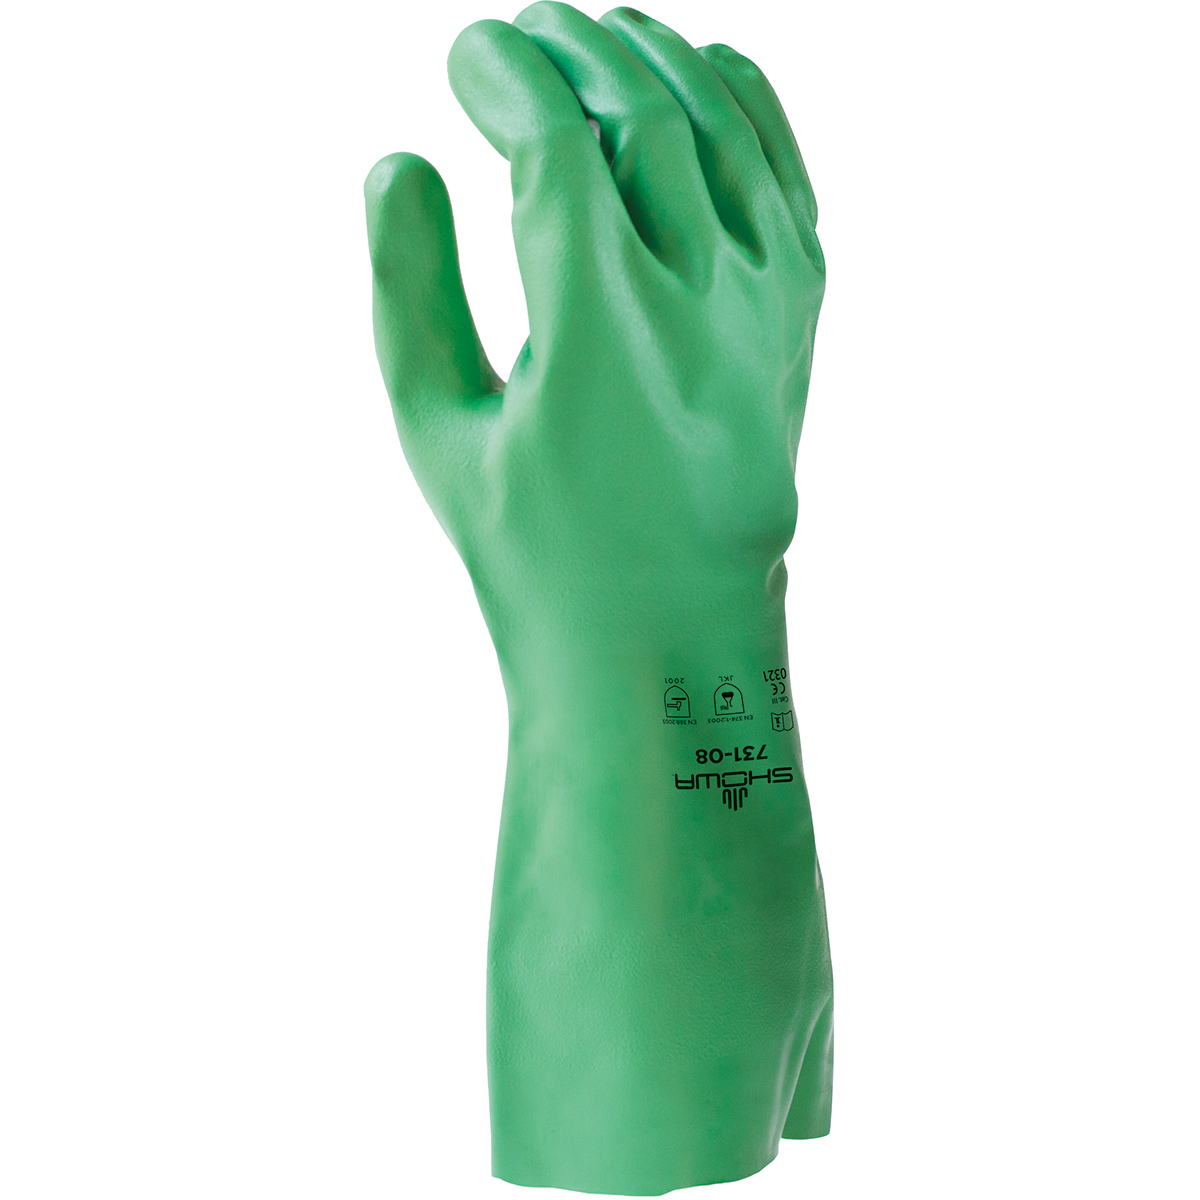 Biodegradable, created w/premium grade polymers and nitrile, 15-mil, green, bisque finish, flocklined/L